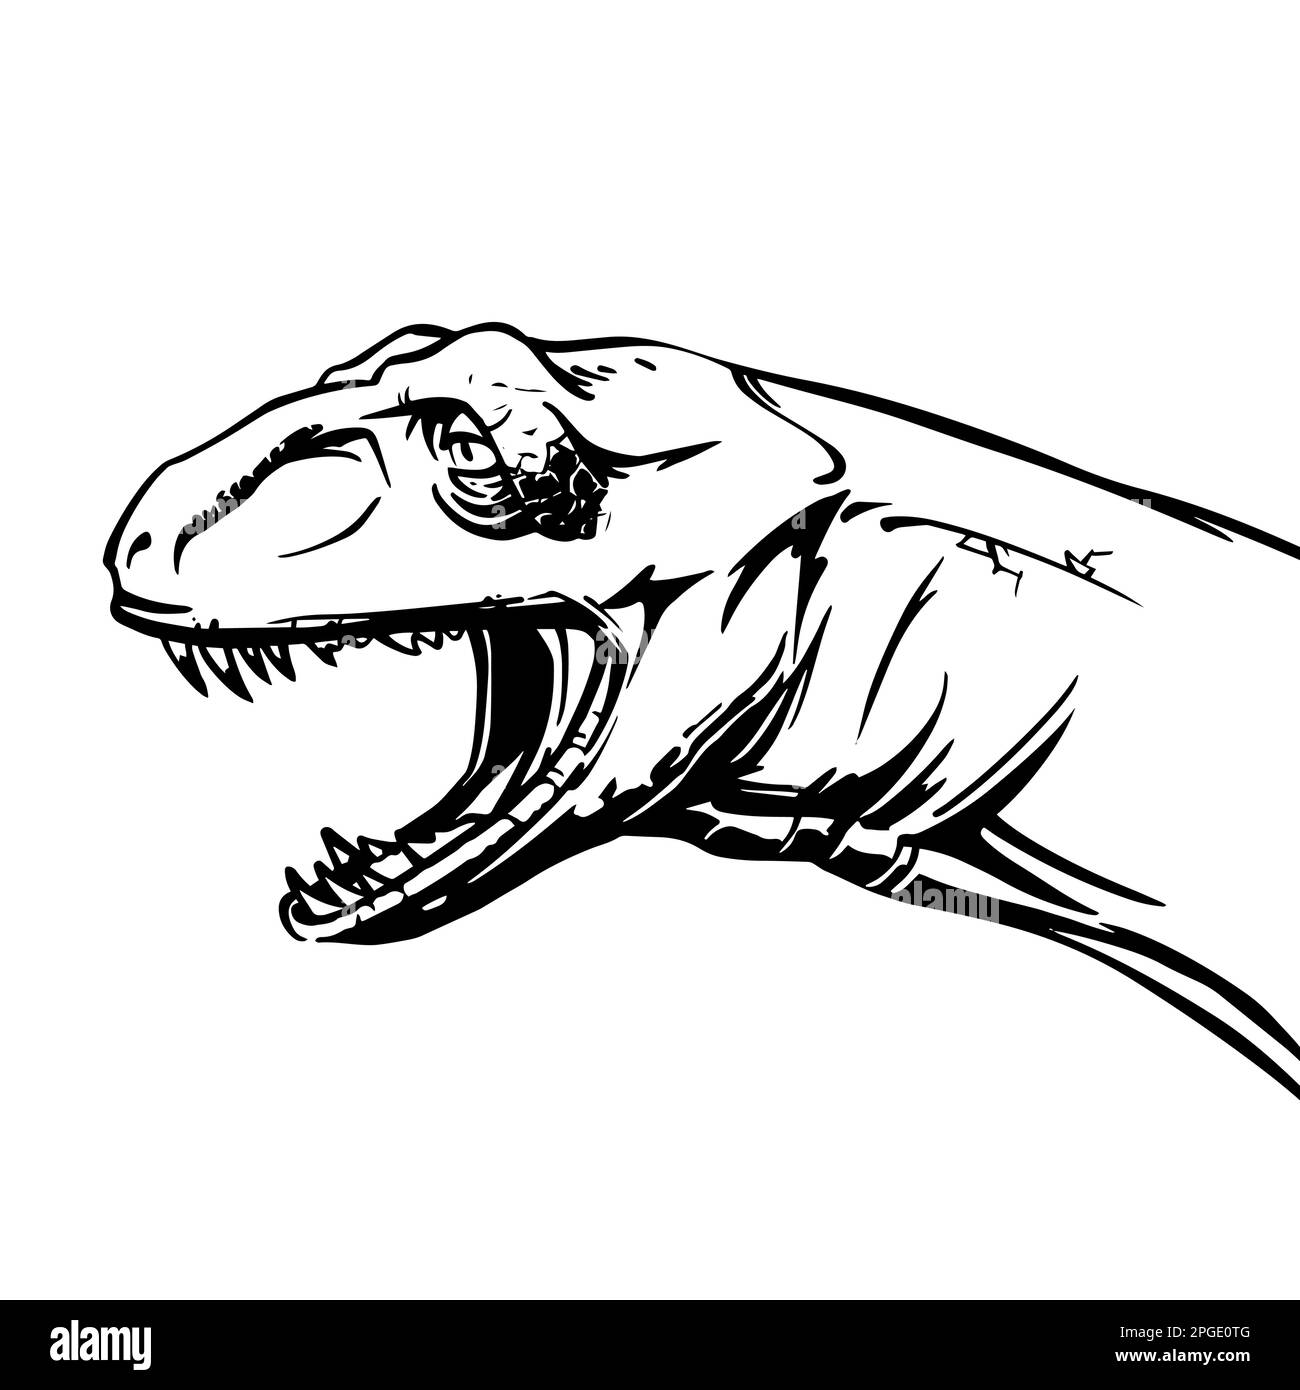 Drawn dinosaur head isolated on white background for print and design. Vector clipart . Stock Vector